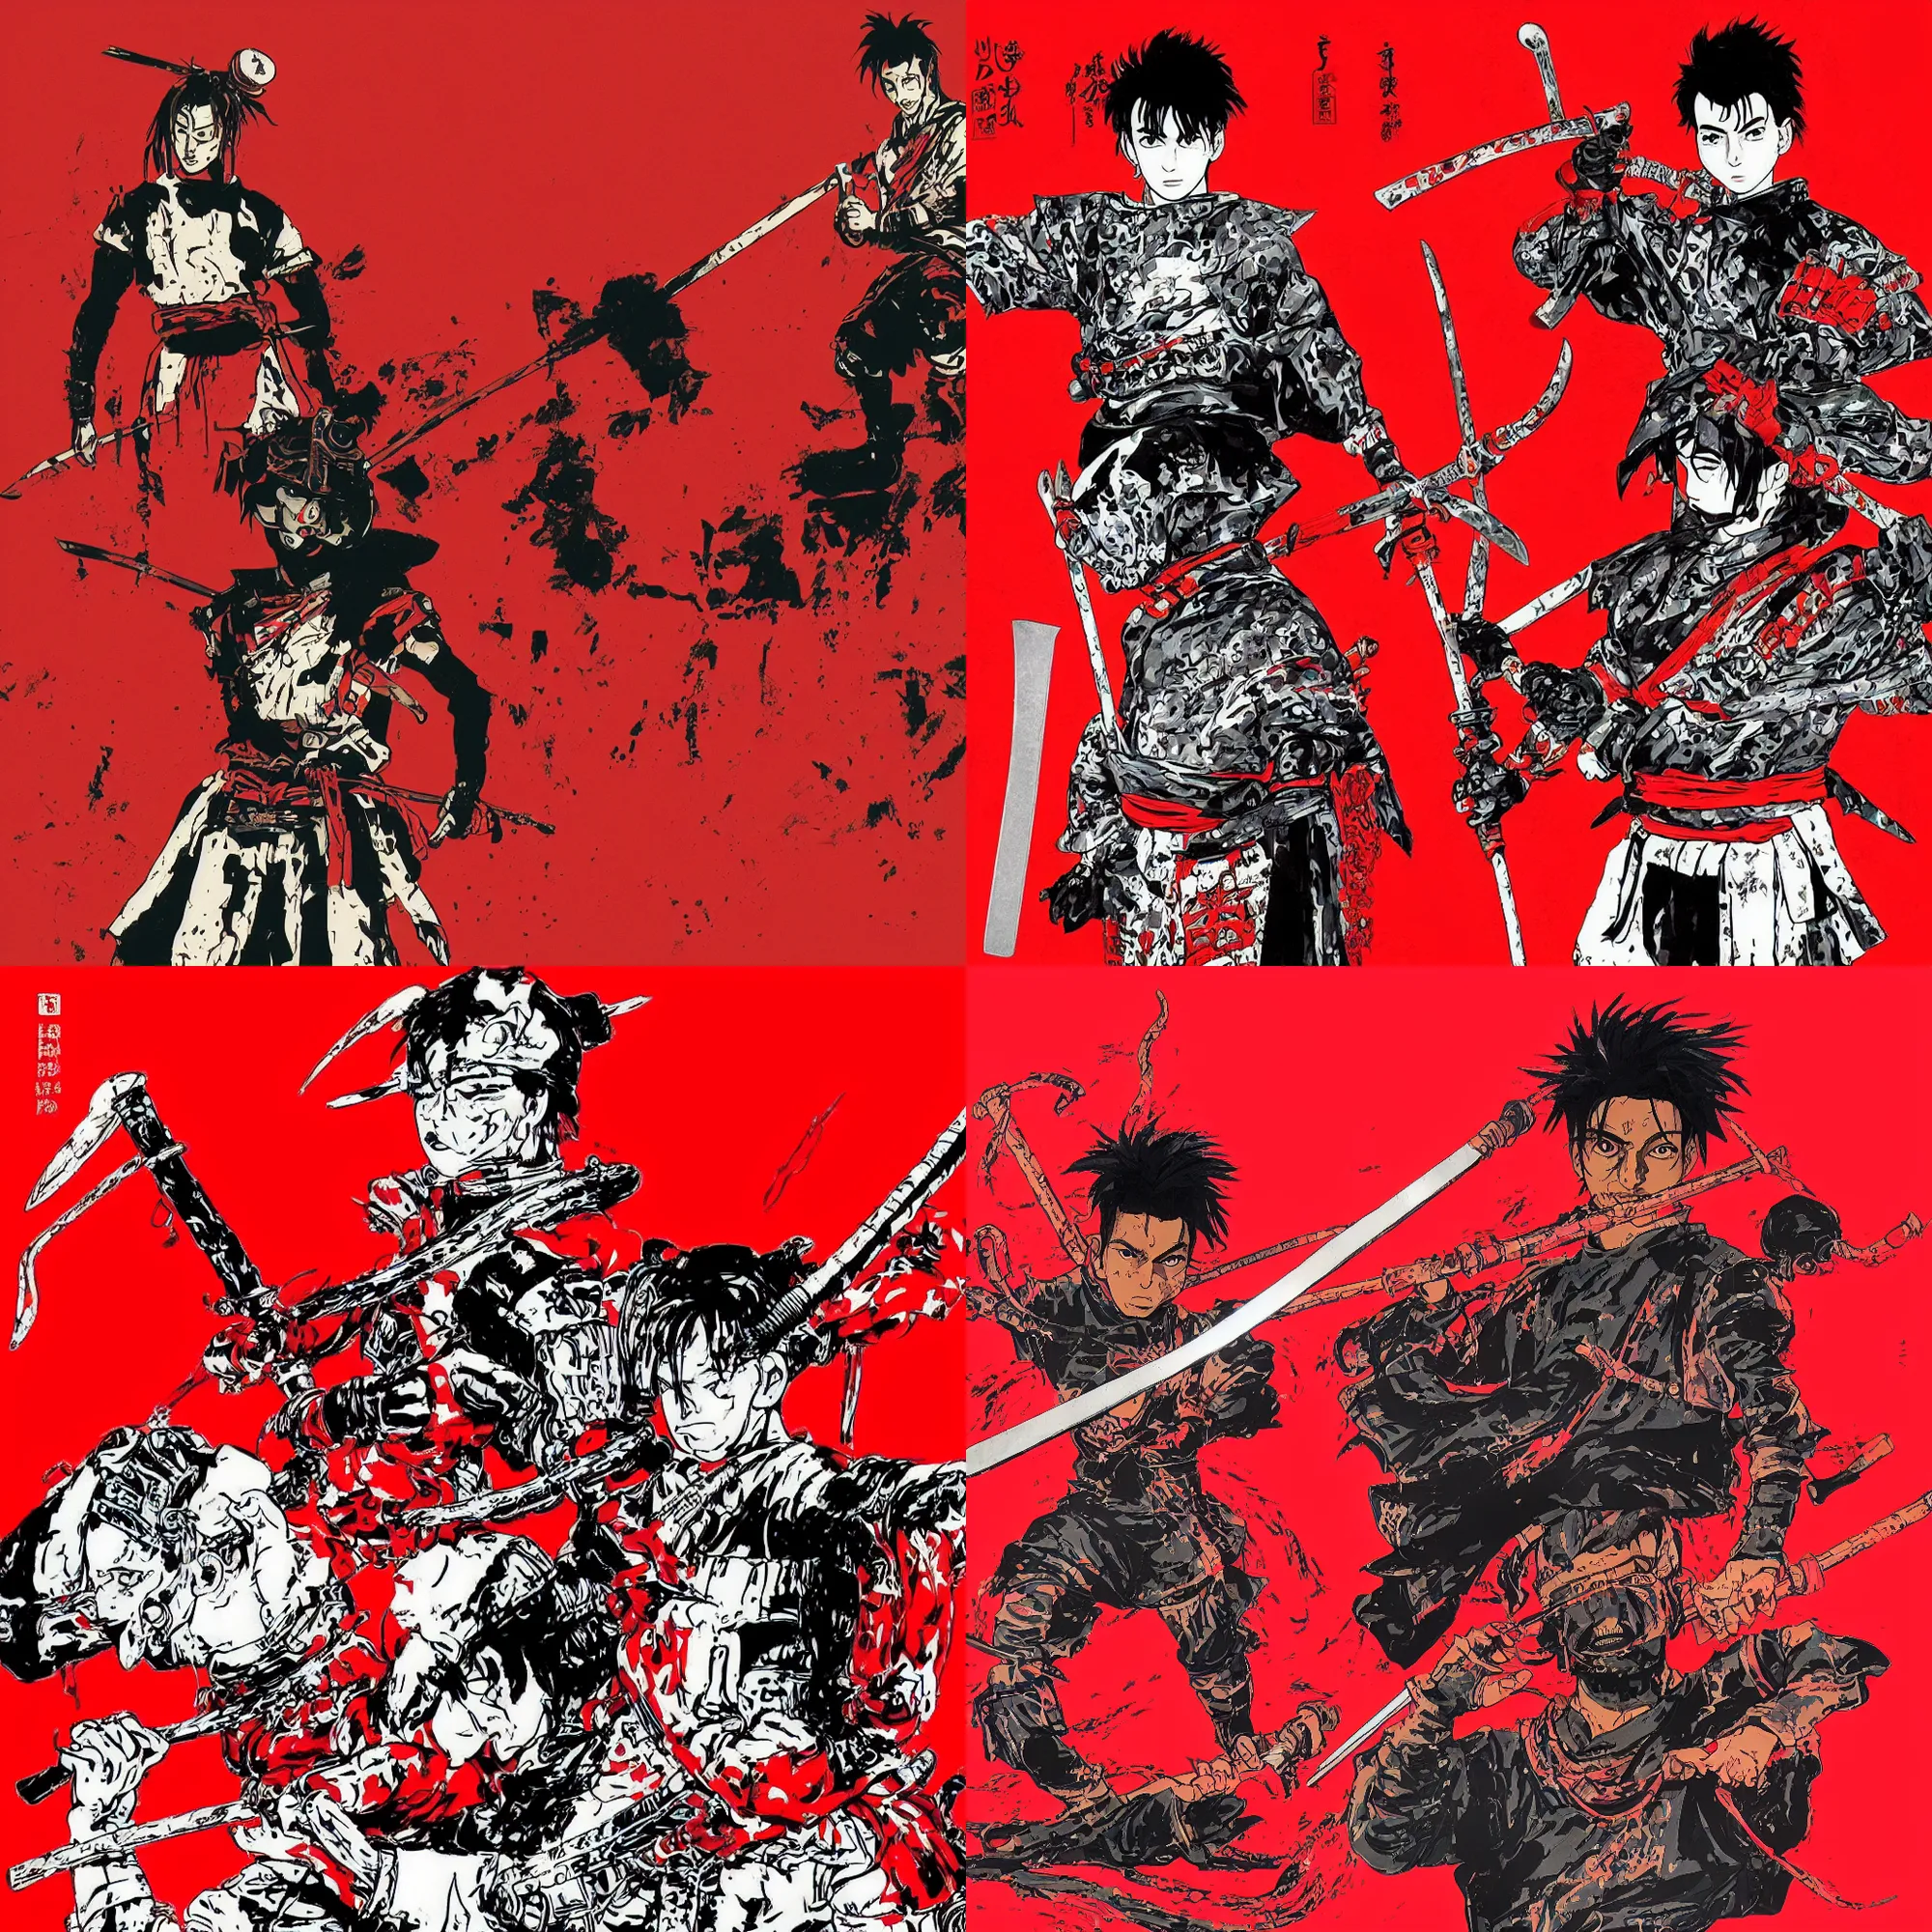 Prompt: album art of Playboi Carti wearing samurai outfit, samurai helmet with a sword posing in front of a red background, in the style of Akira (1988)